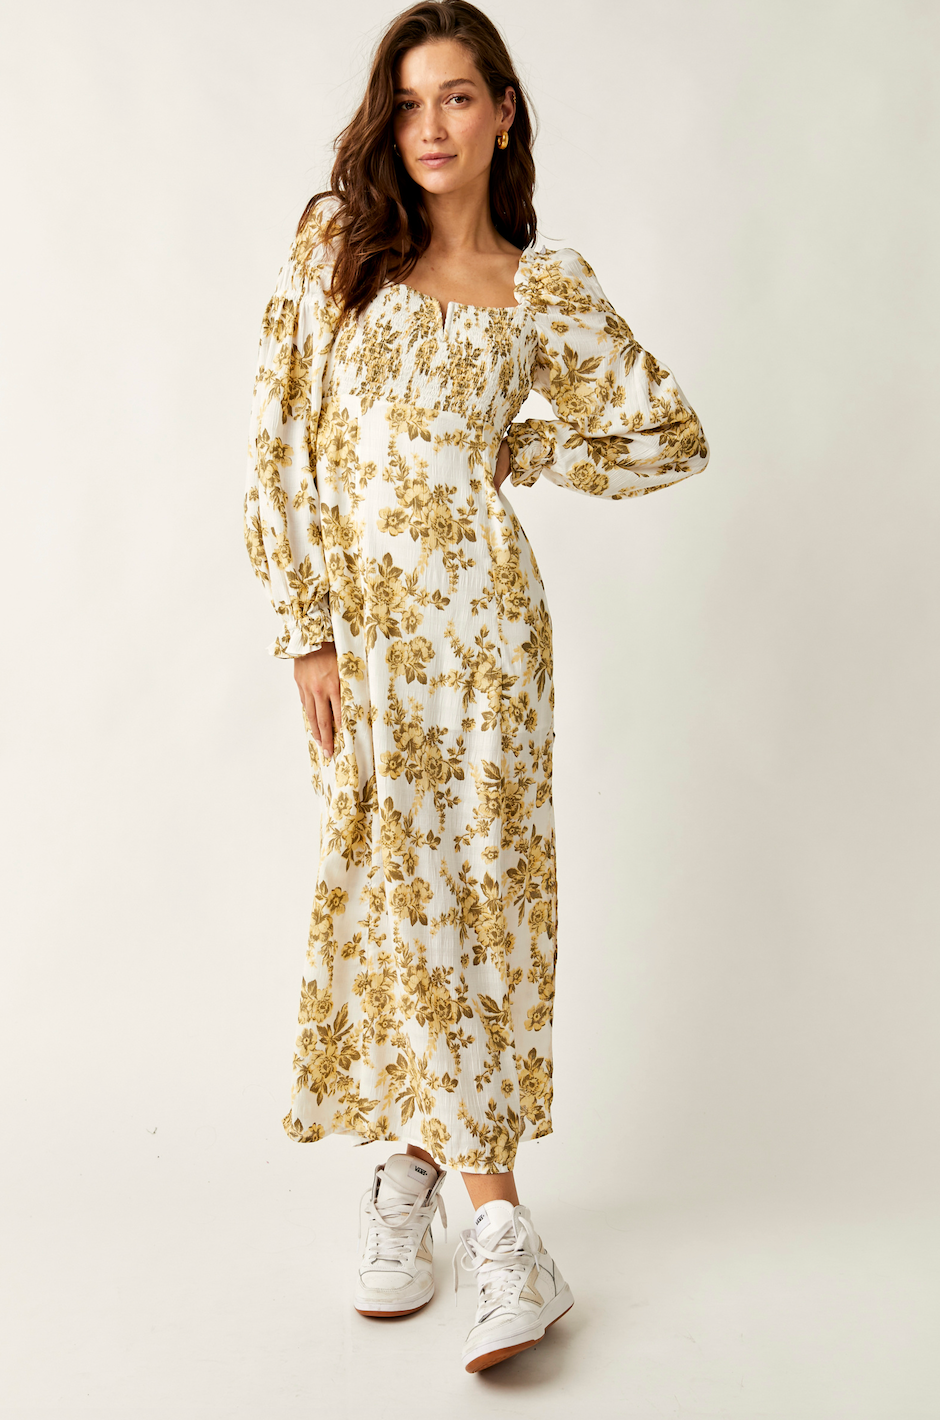 FREE PEOPLE JAYMES MIDI DRESS IN PASTRY CREAM COMBO